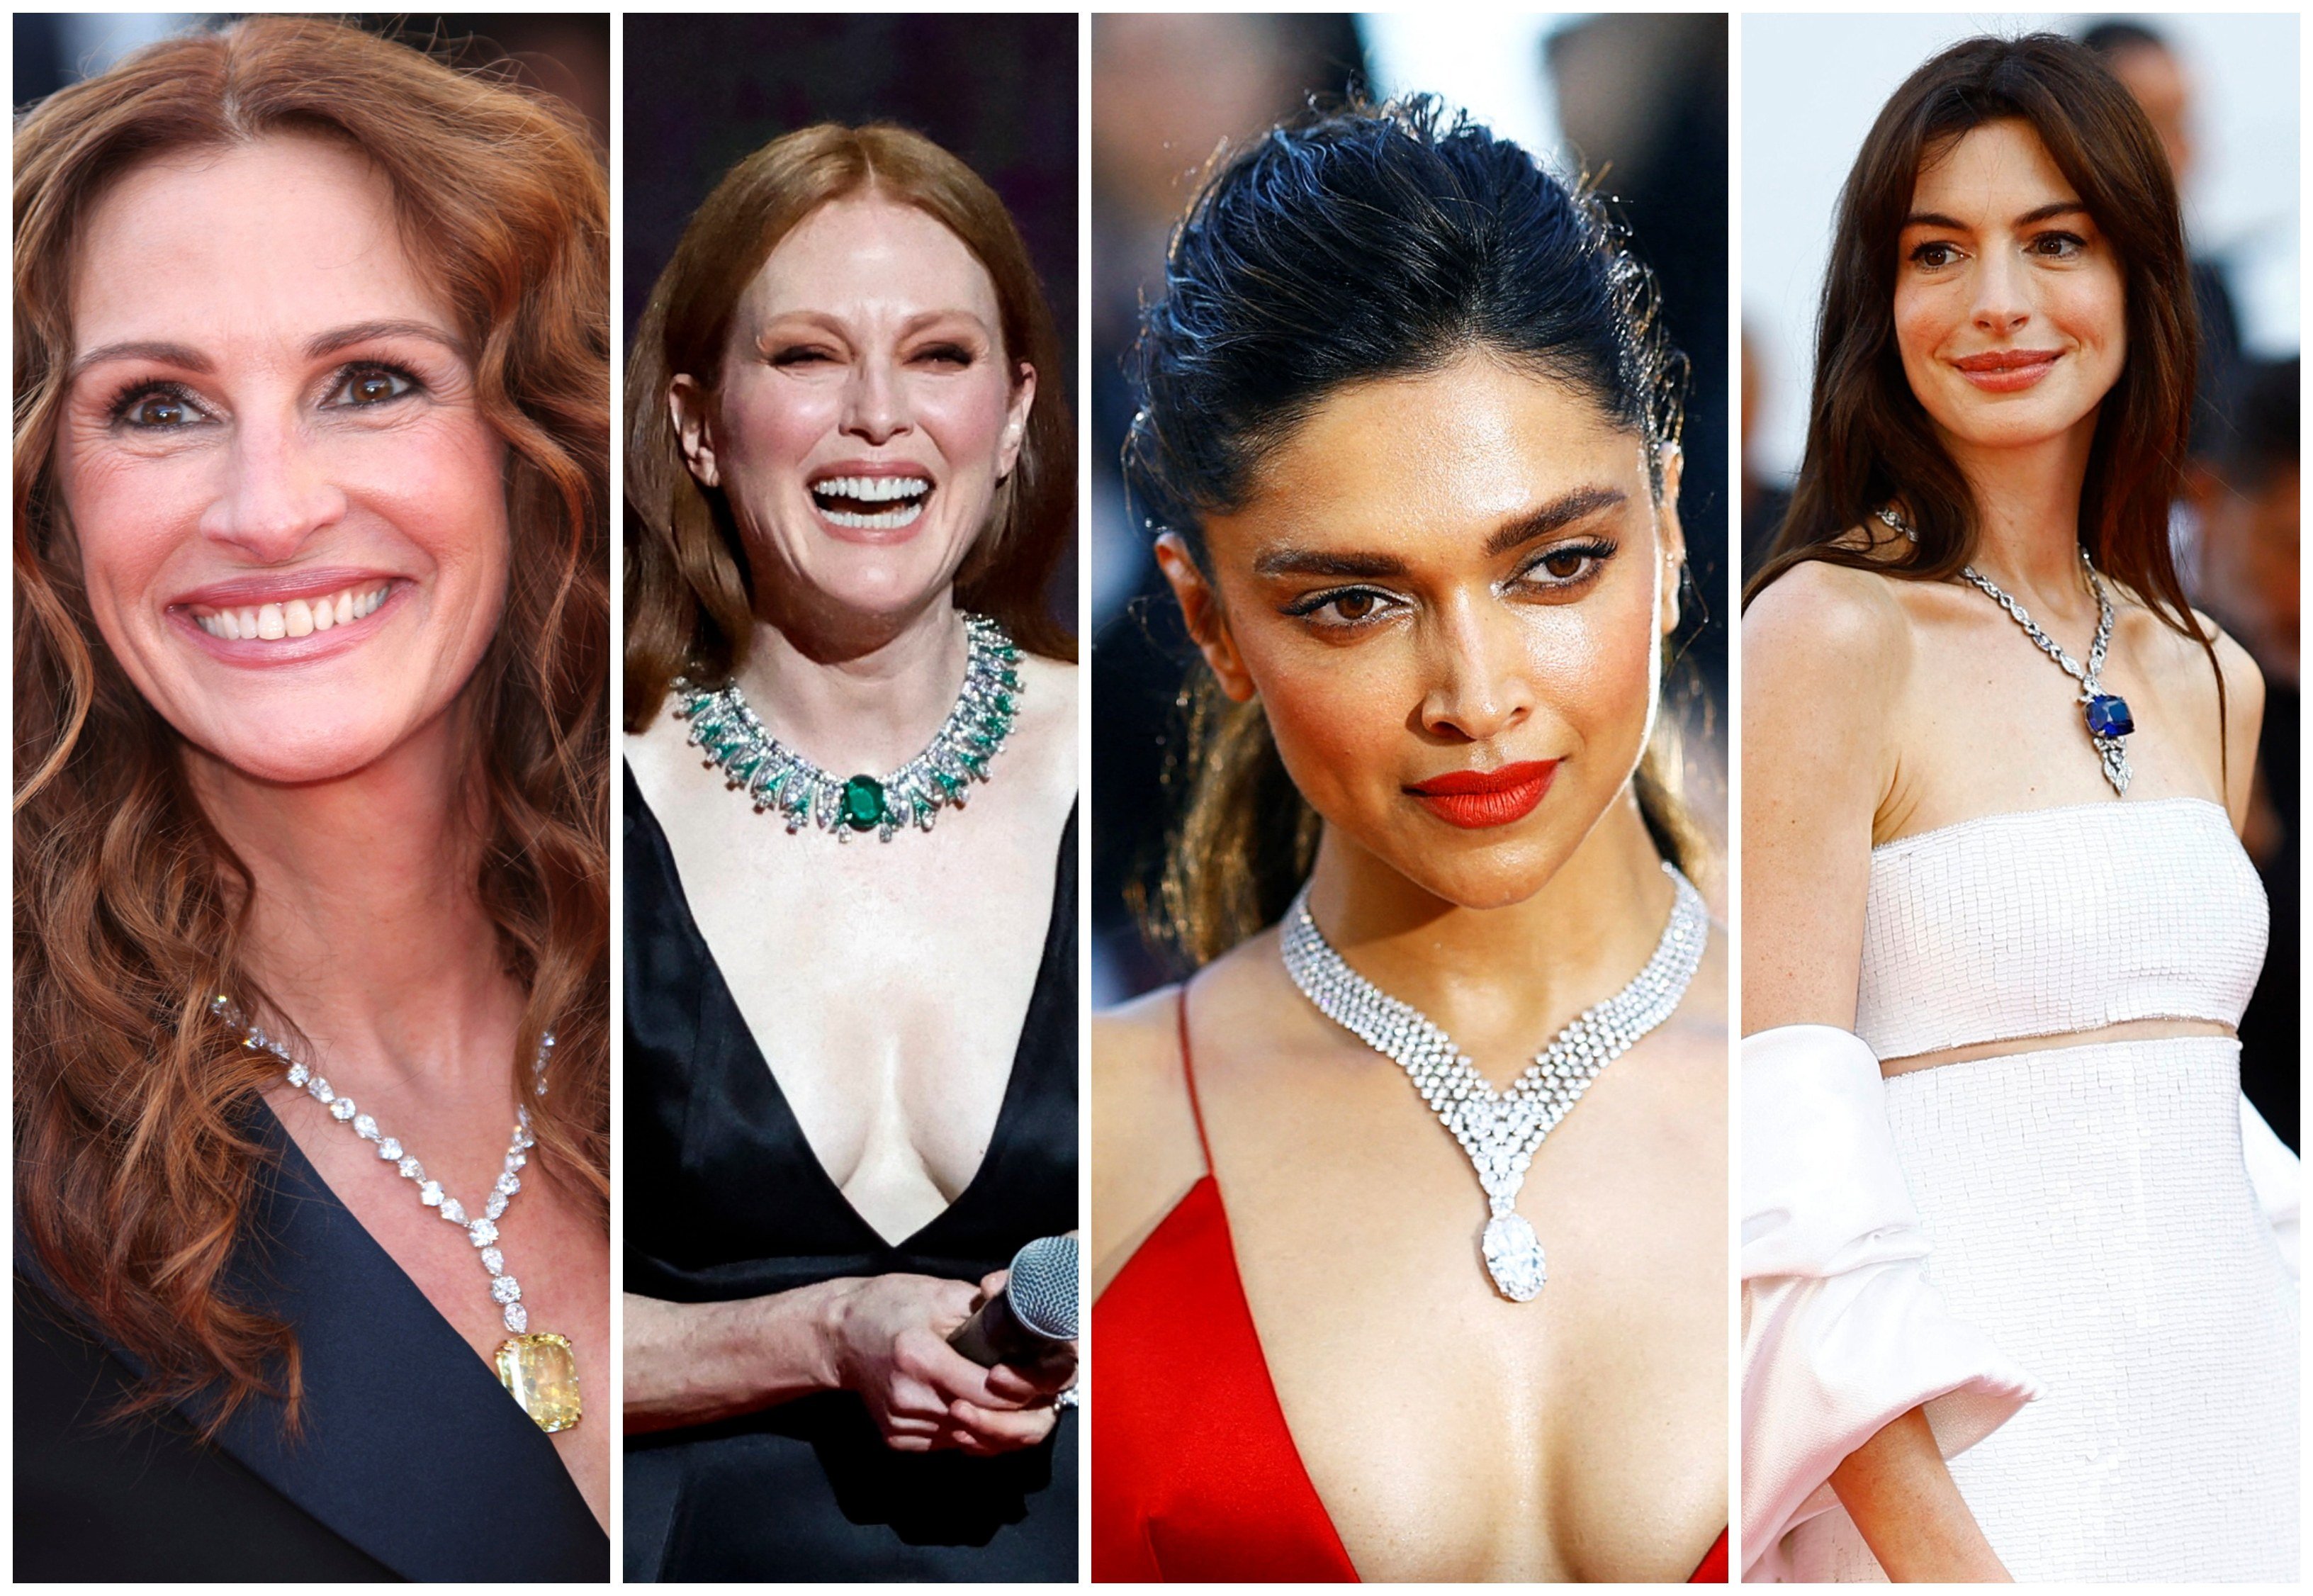 Celebrities showed off some serious bling at the Cannes Film Festival 2022. Photos: AP, Reuters